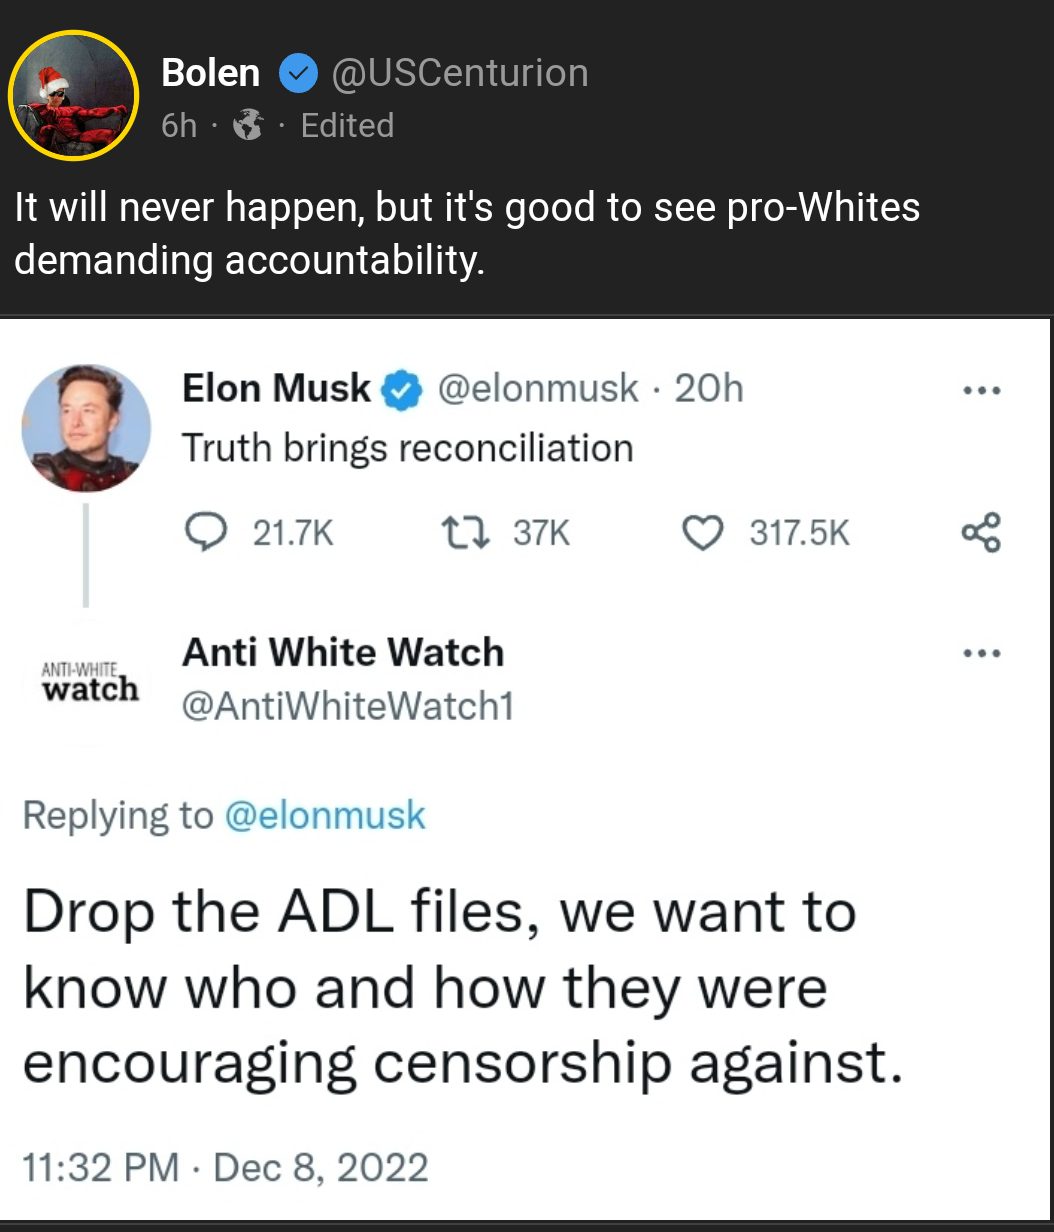 Where are the ADL Files